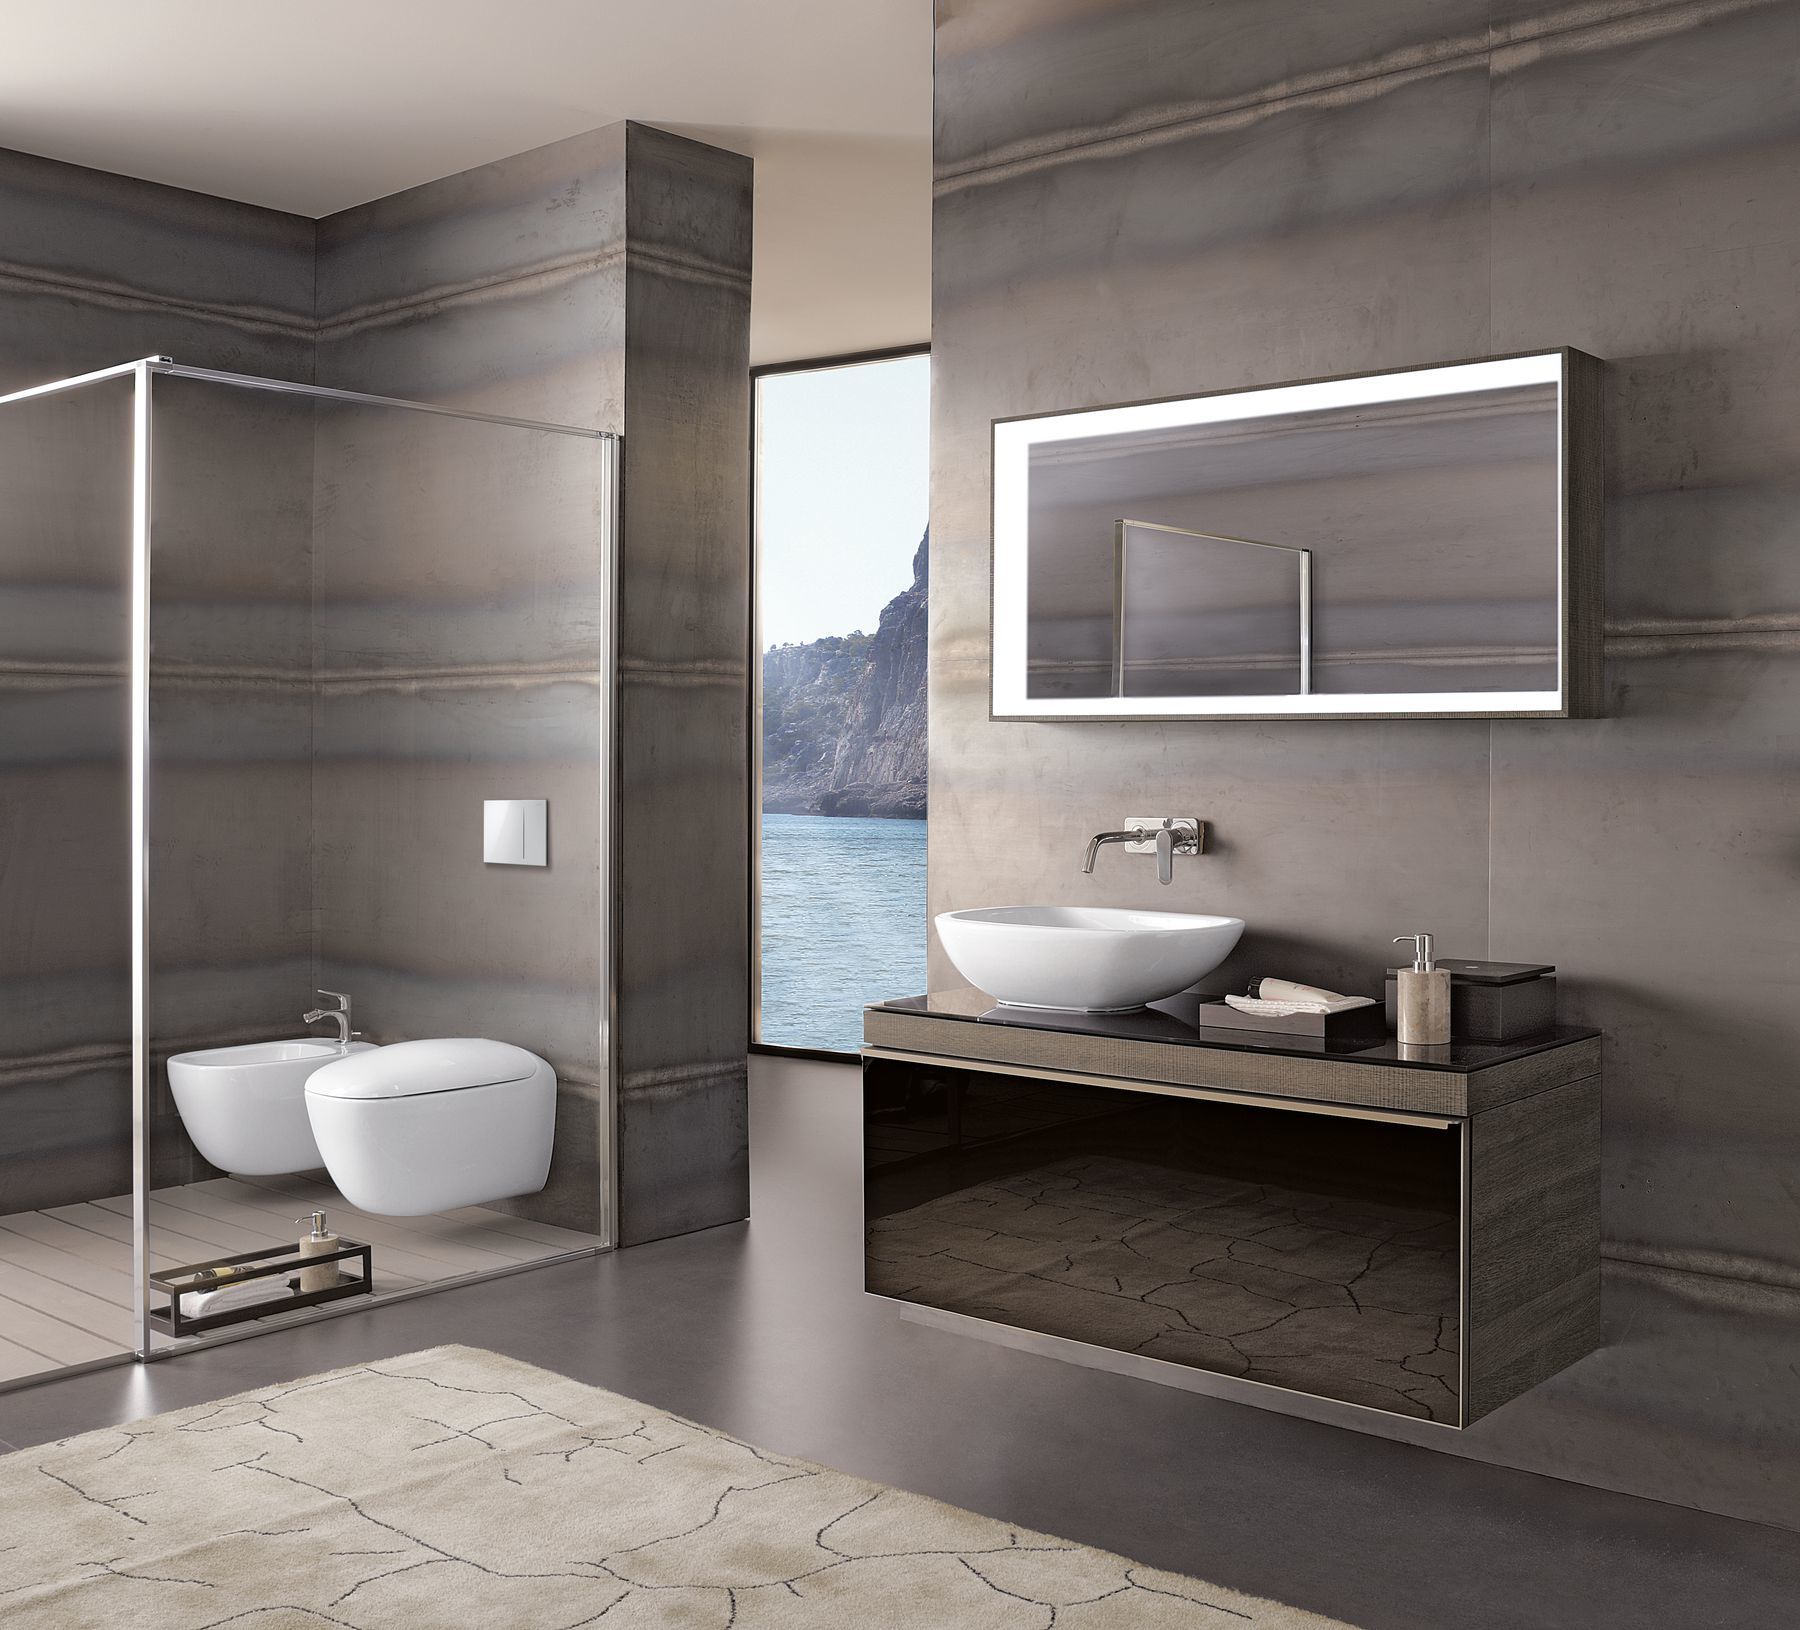 Geberit Citterio bathroom with a sea view